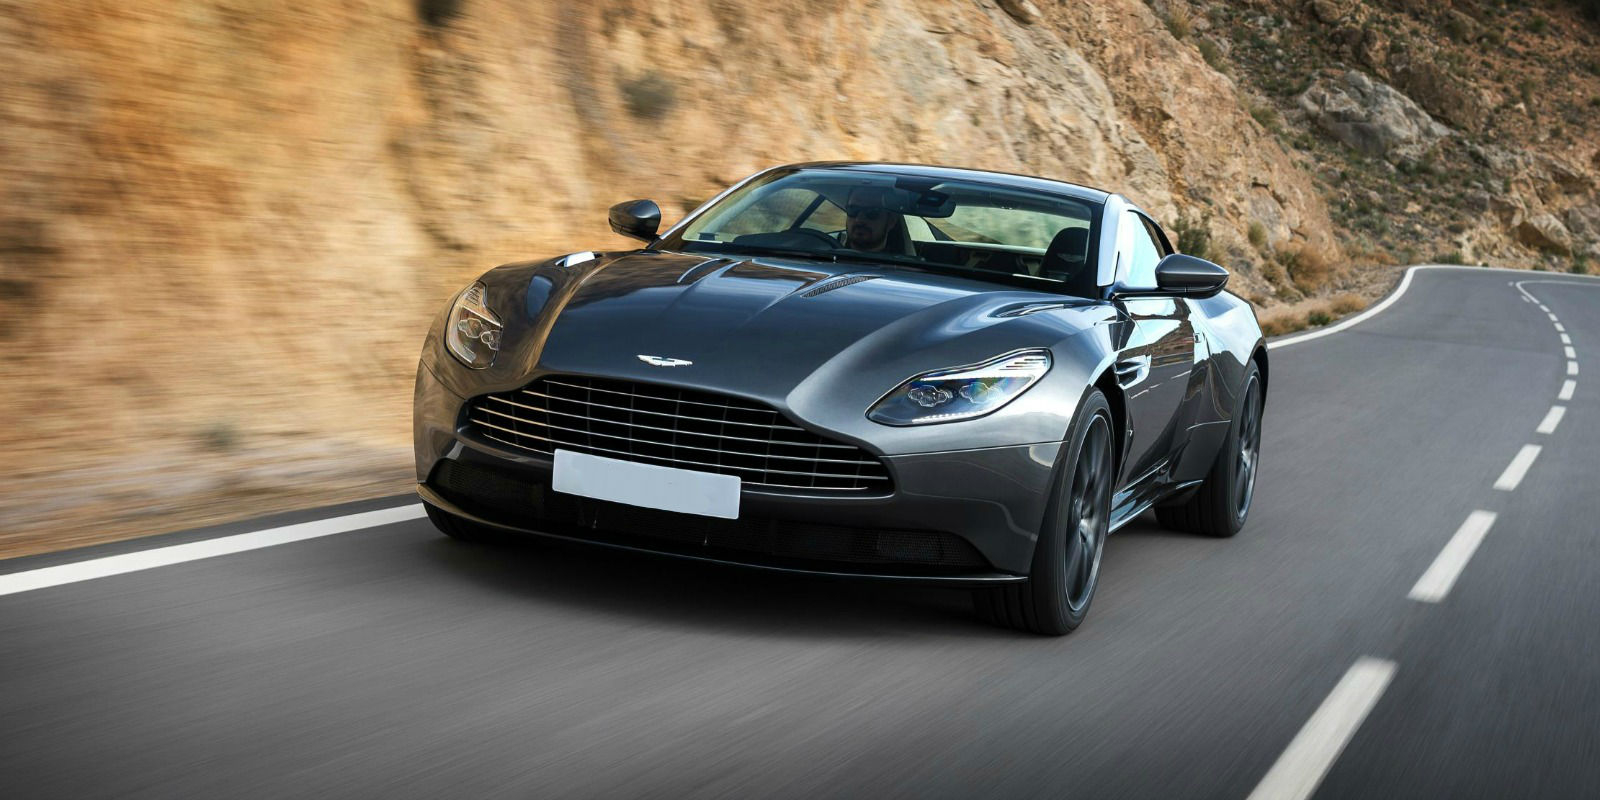 Aston Martin Db11 Review Carwow All Cars Sport